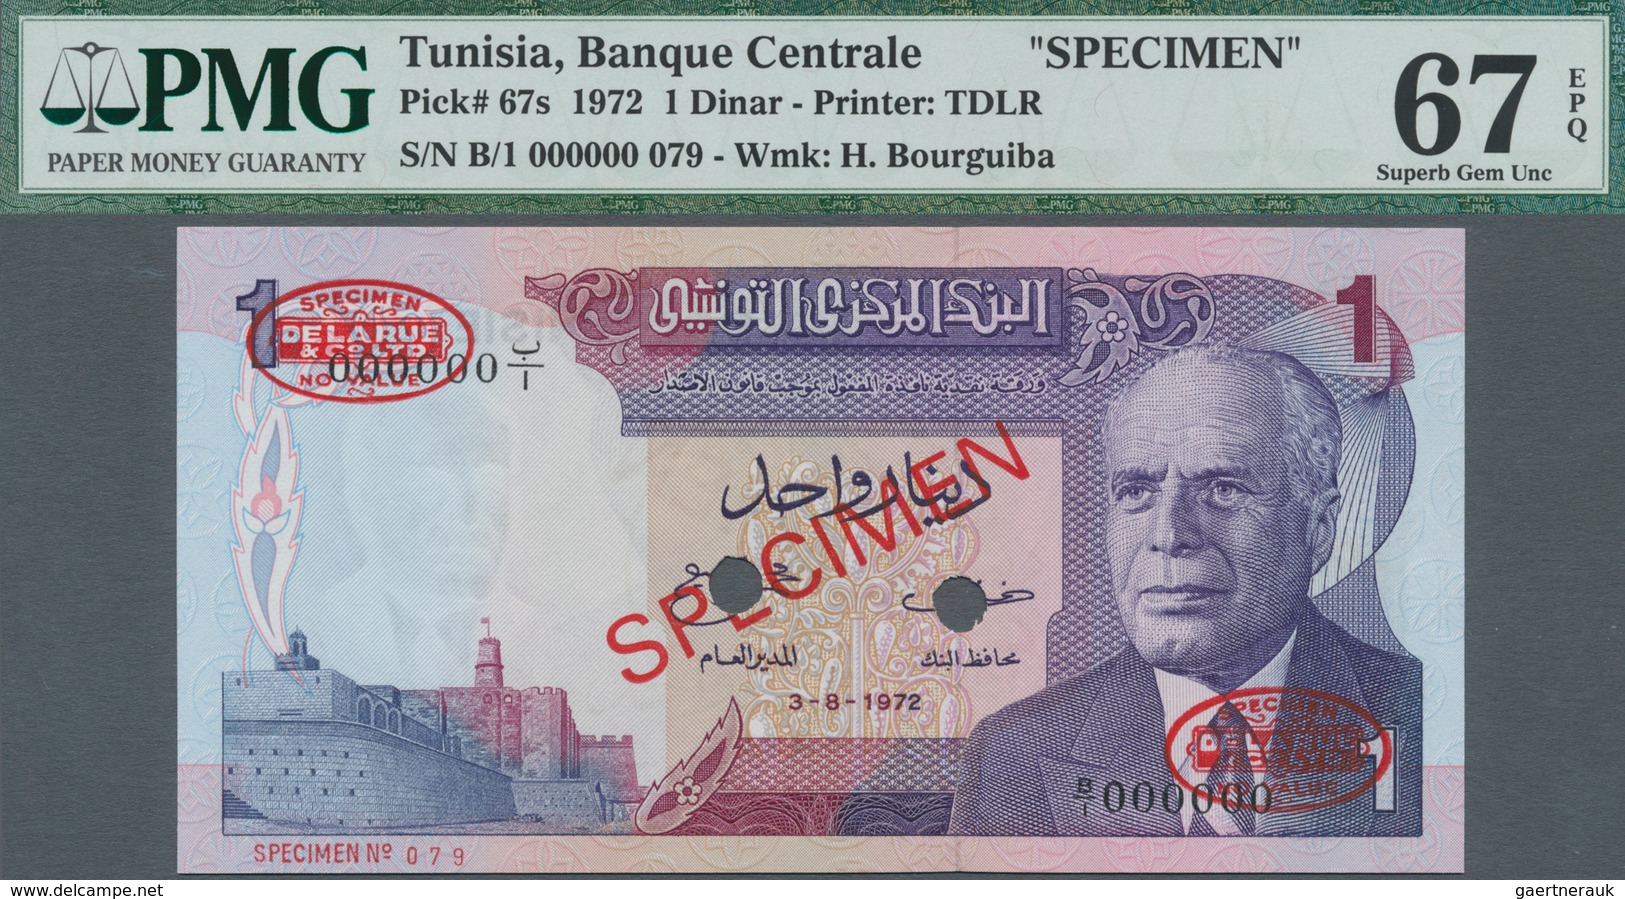 Tunisia / Tunisien: Set Of 3 Notes 1/2, 1 And 5 Dinars 1972 Specimen P. 66s-68s, All PMG Graded: 66G - Tusesië